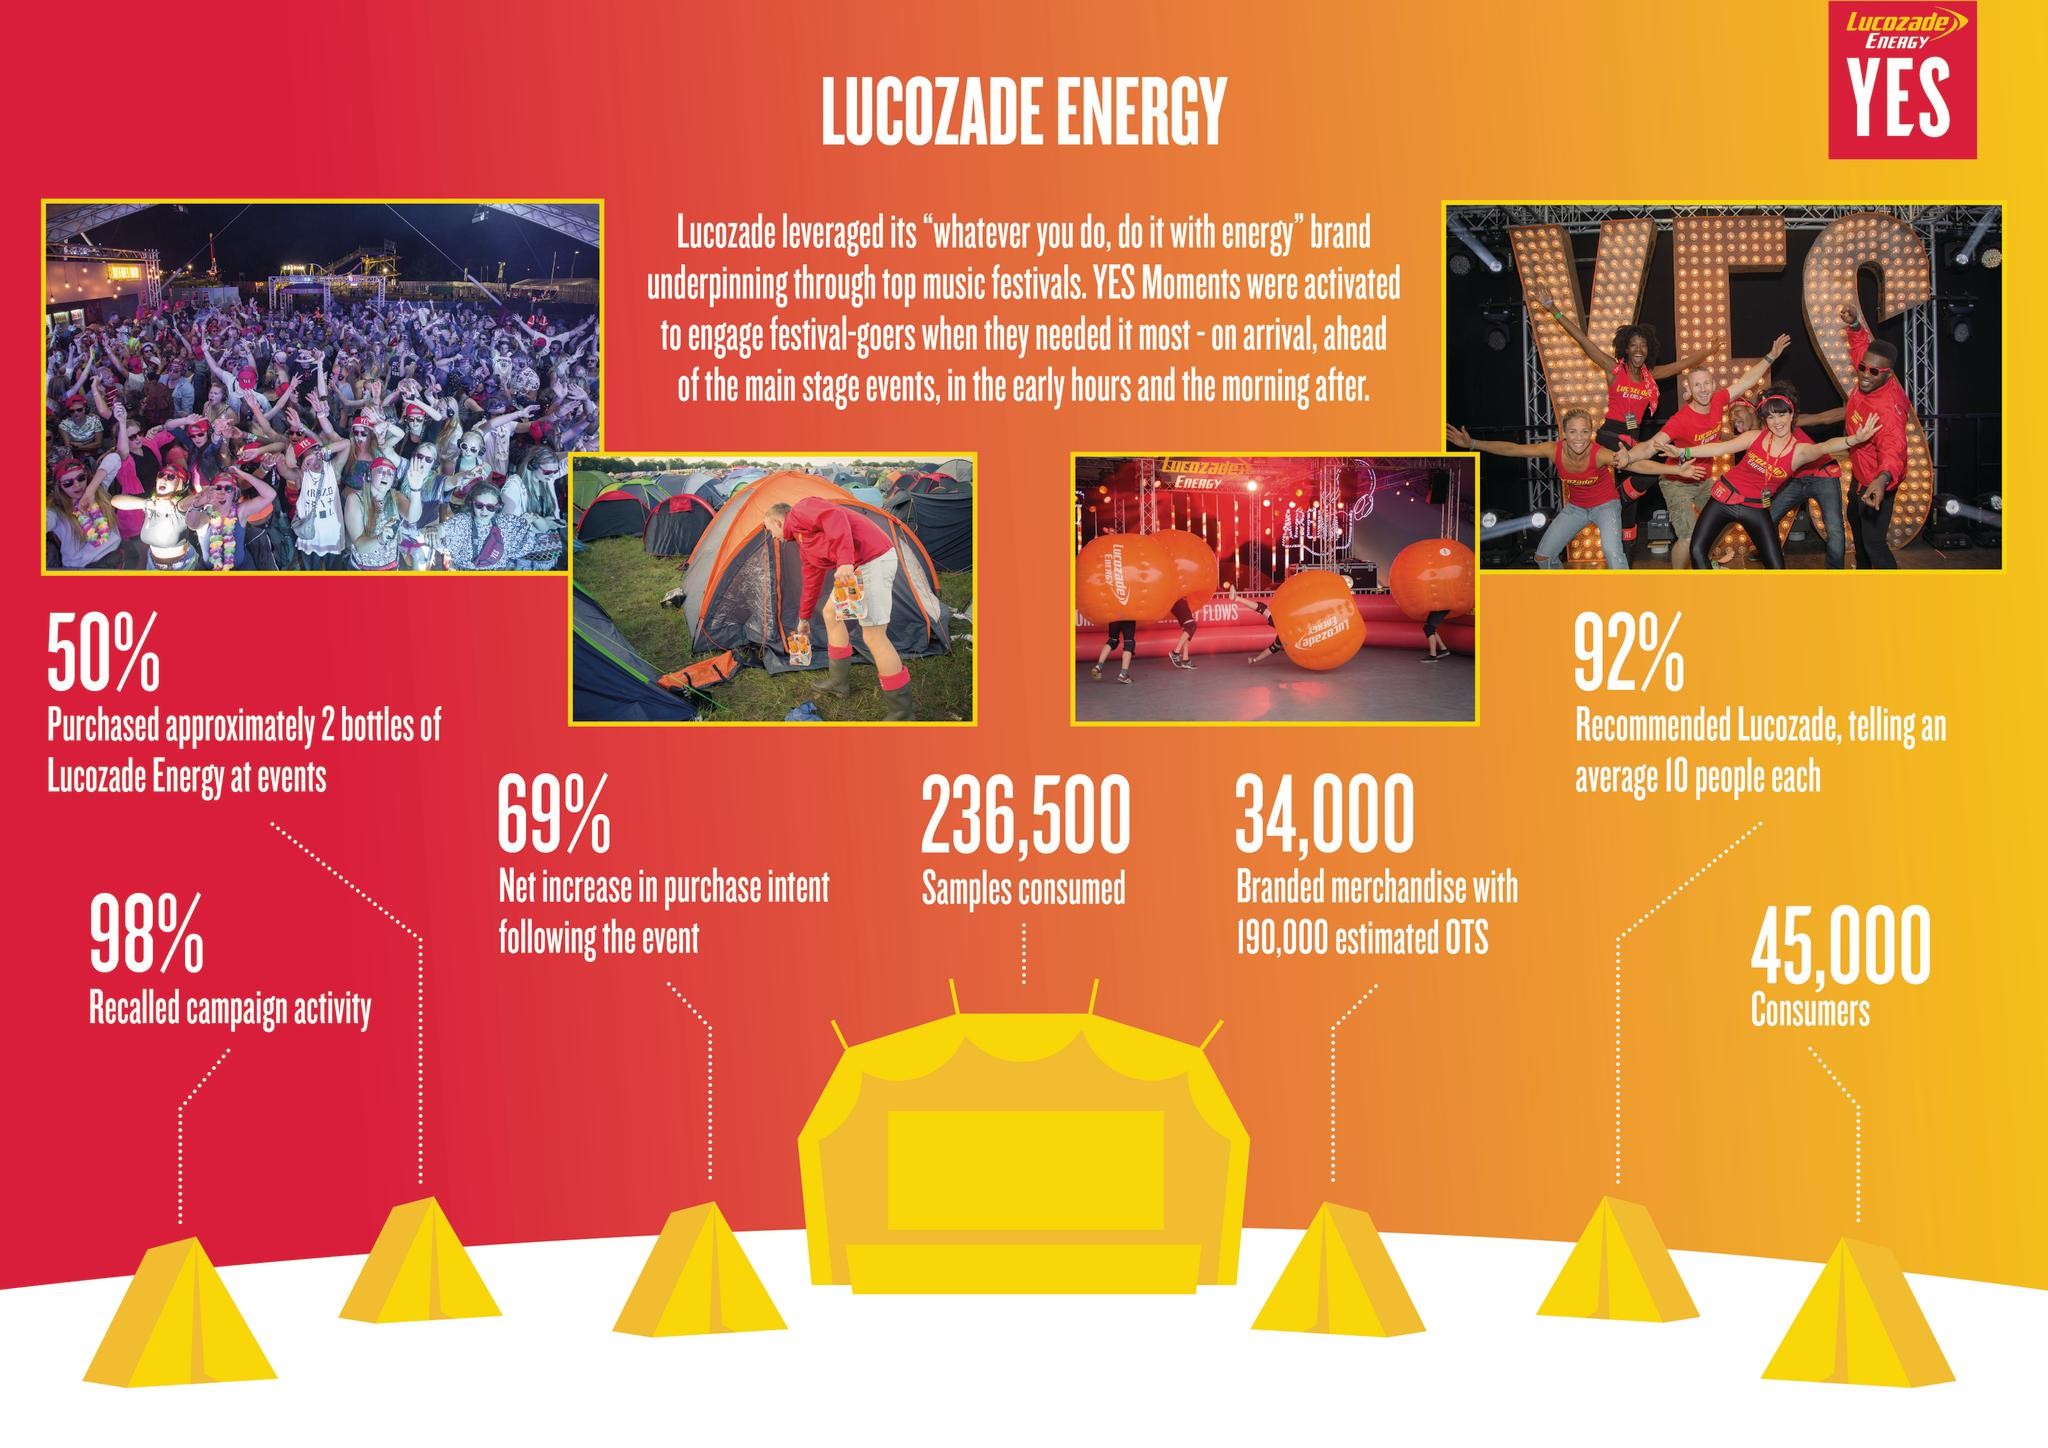 TURNING MUSIC FESTIVALS INTO A LUCOZADE BIG BRAND PARTY